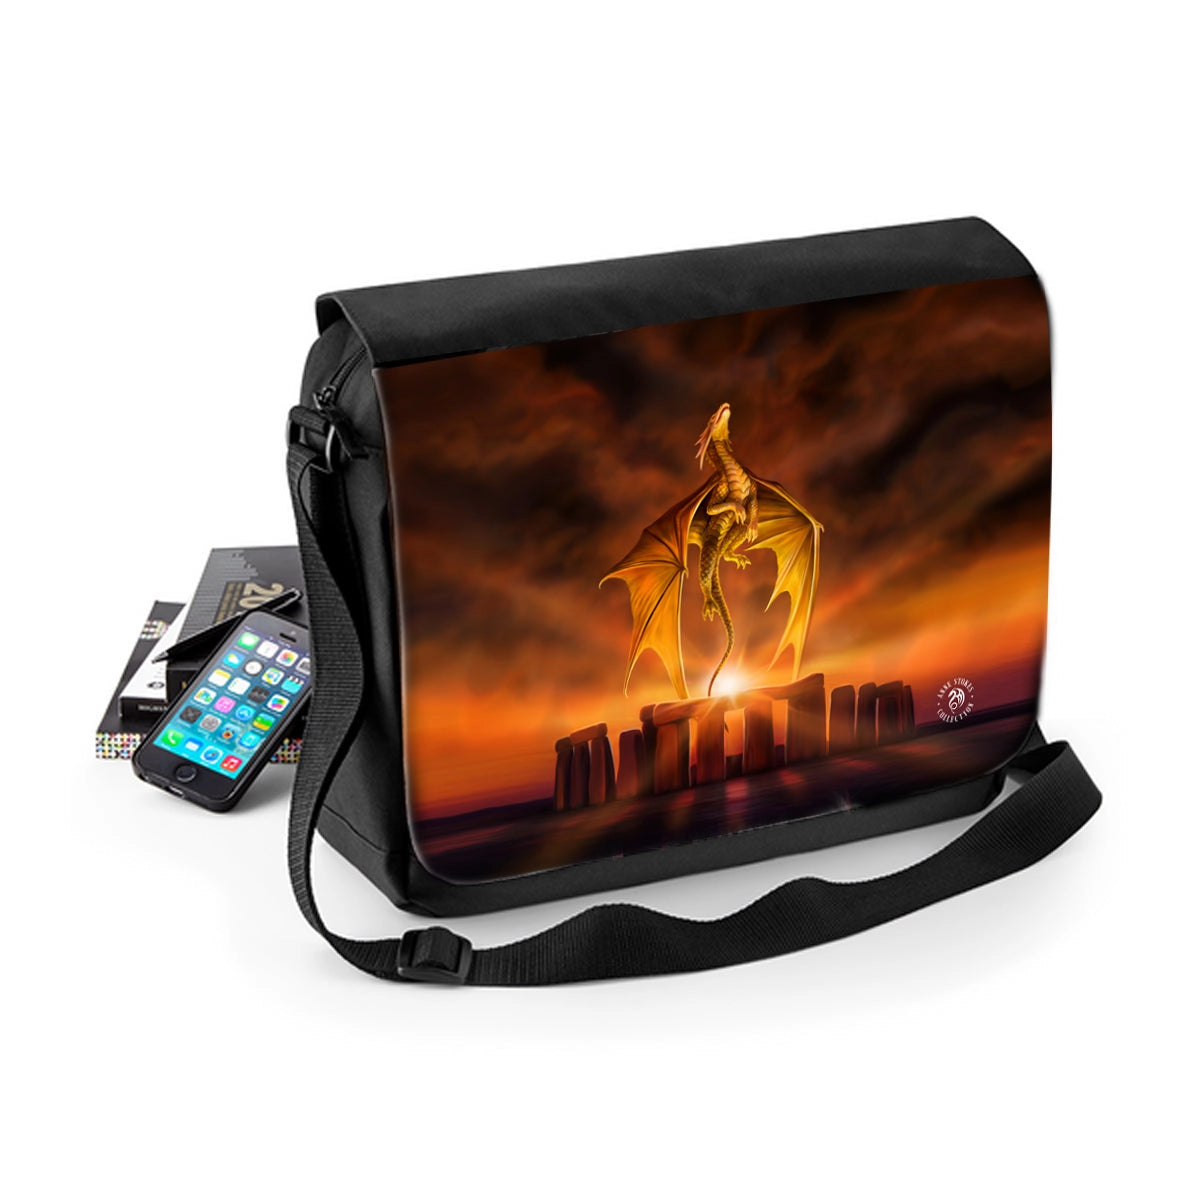 Solstice - Messenger Bag featuring artwork by Anne Stokes